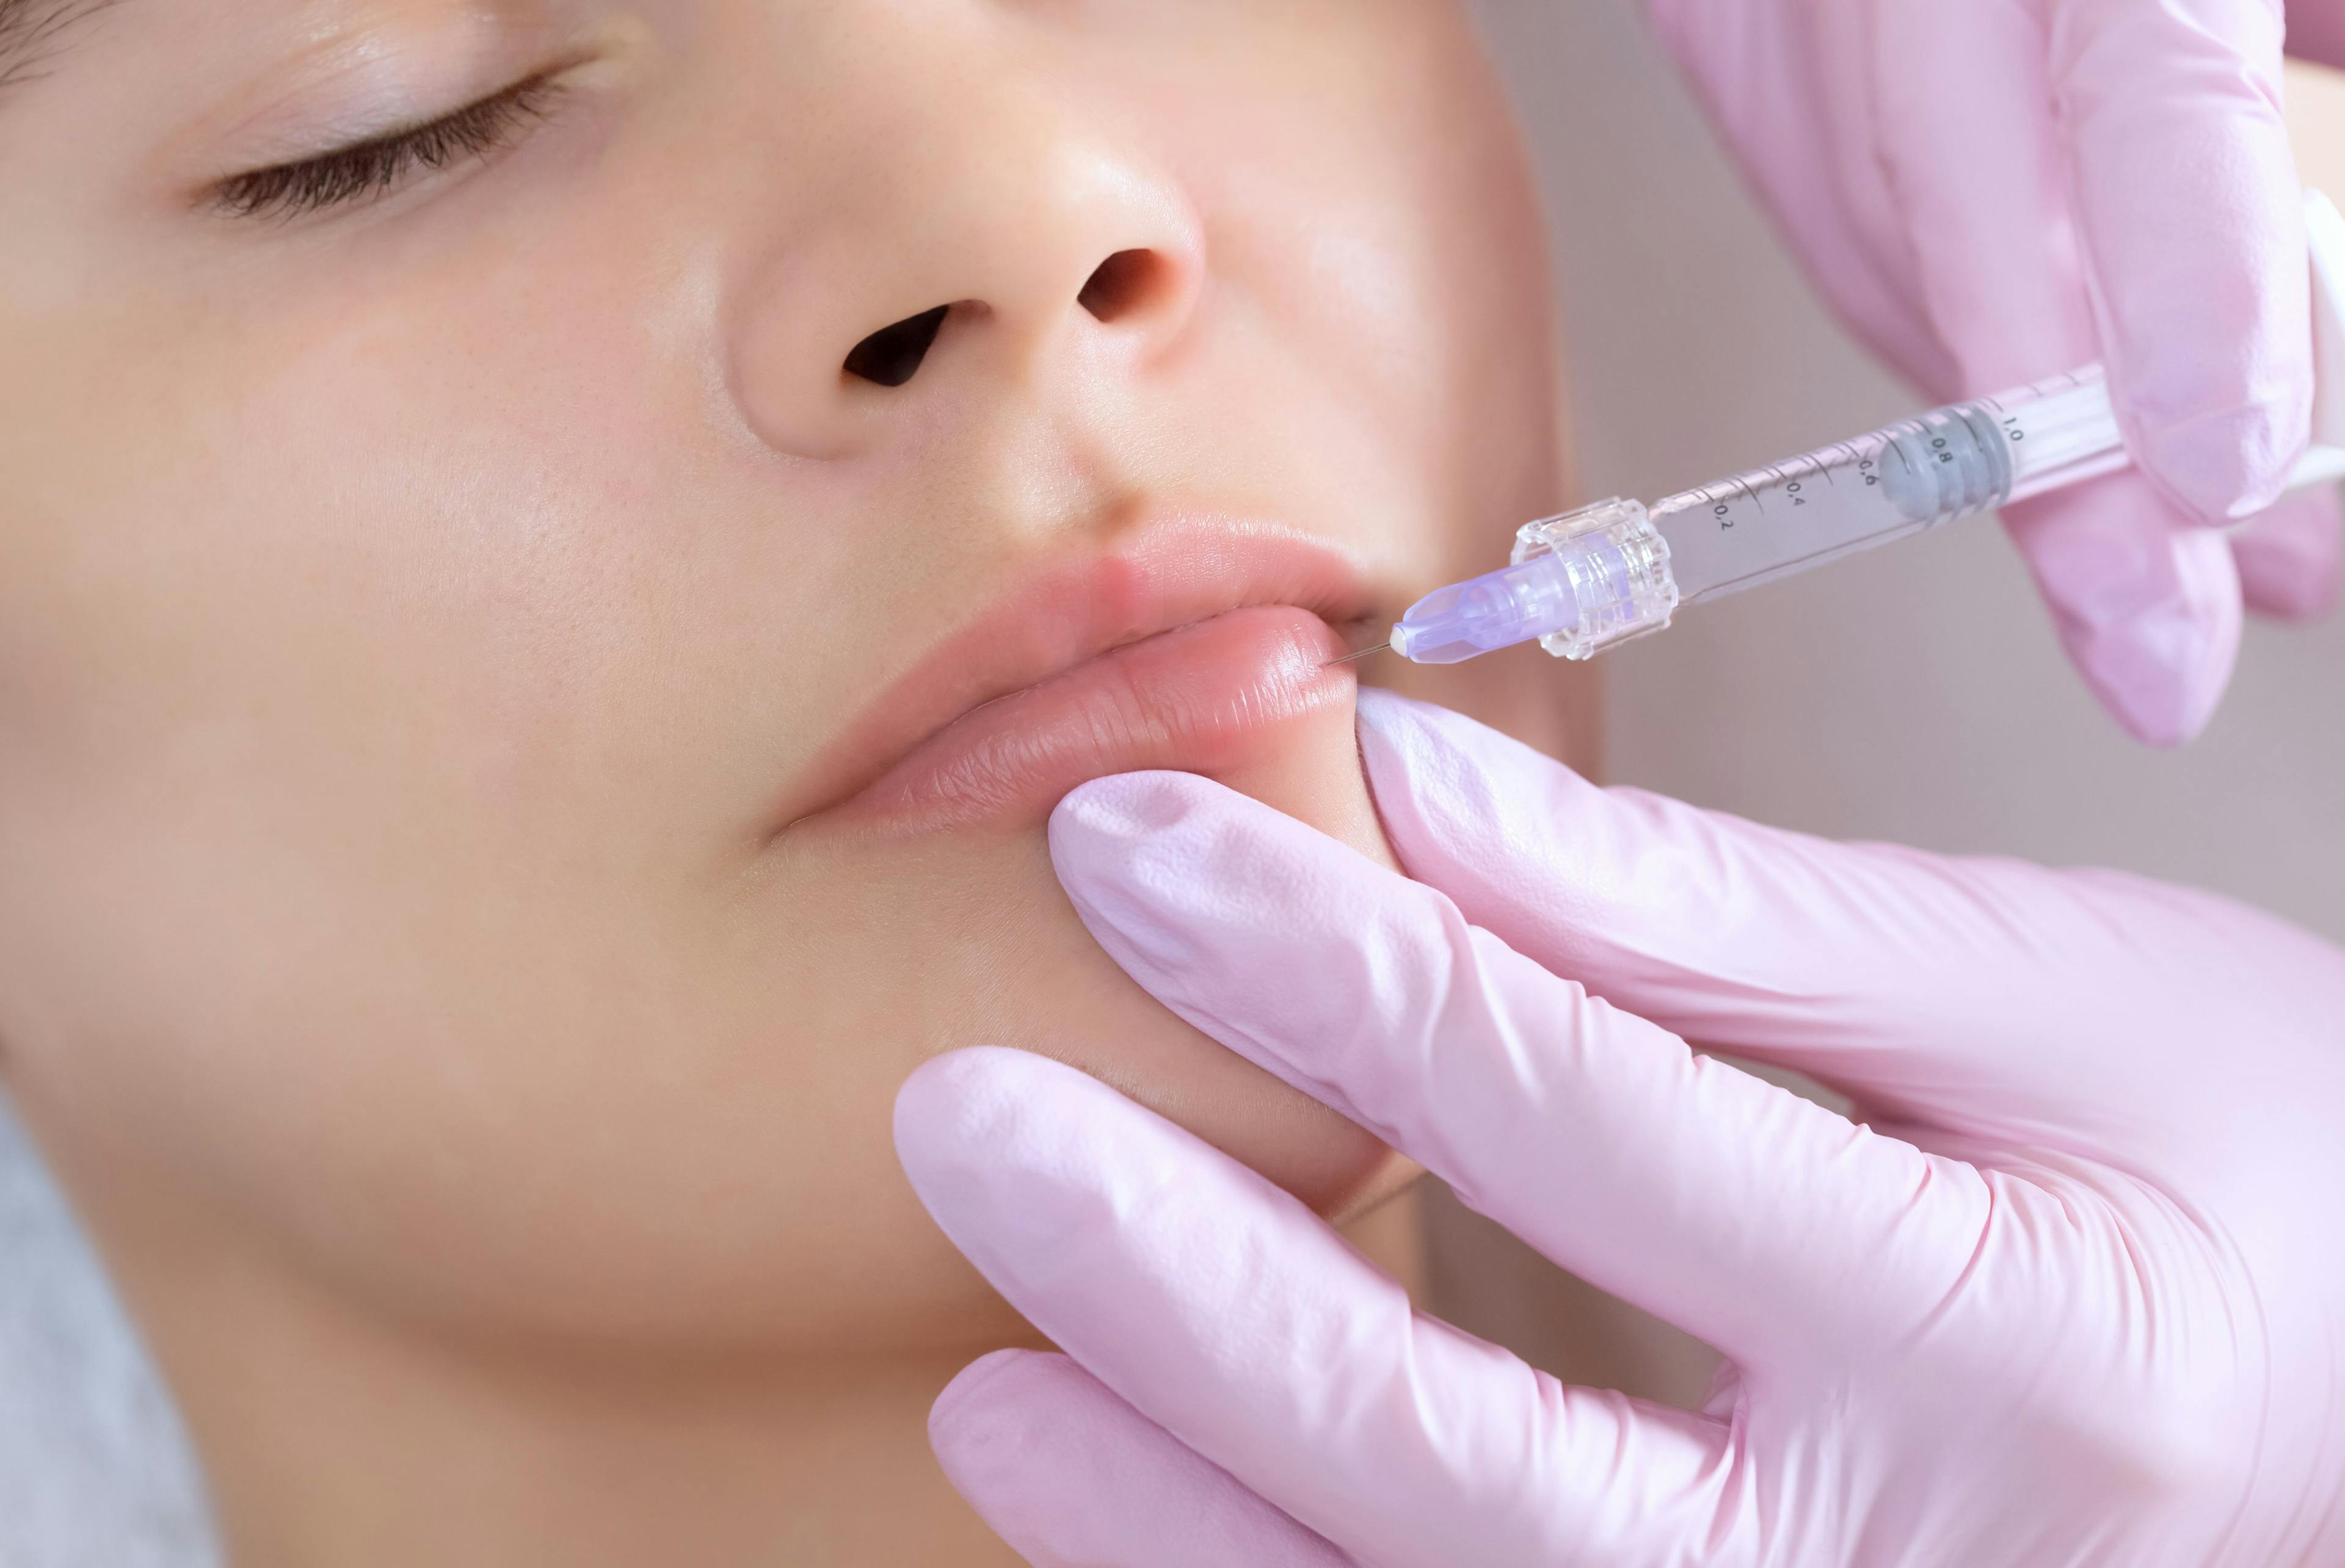 A surgical fix for problematic lip fillers